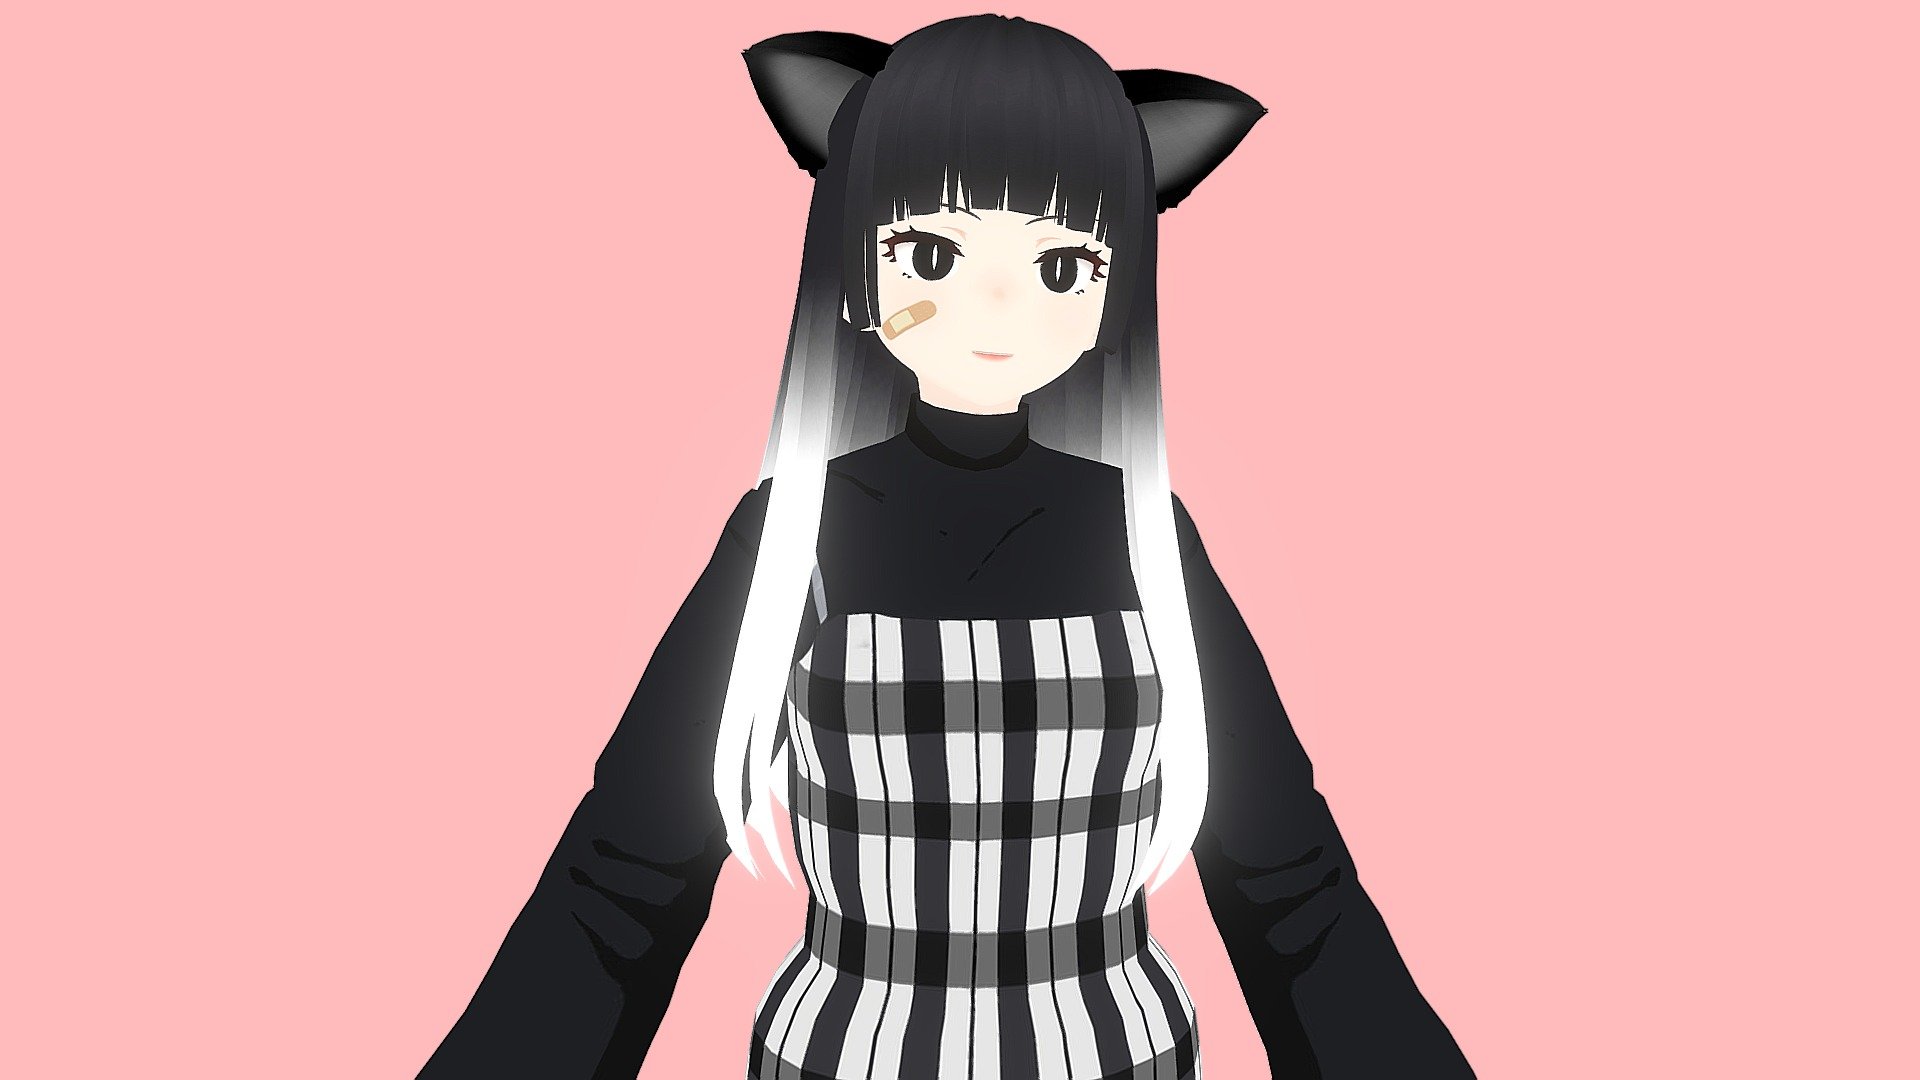 3D anime Character based on Japanese anime: this character is made using blender 2.92 software, it is a 3d anime character that is ready to be used in games and usage. Anime-Style, Ready, Game Ready

Features: • Rigged • Unwrapped. • Body, hair, and clothes. • Textured.. • Bones Made in blender 2.92

Terms of Use: •Commercial Use: Allowed •Credit: Not Required But Appreciated - Cat 3D Anime Character Girl for Blender - Buy Royalty Free 3D model by CGTOON (@CGBest) 3d model